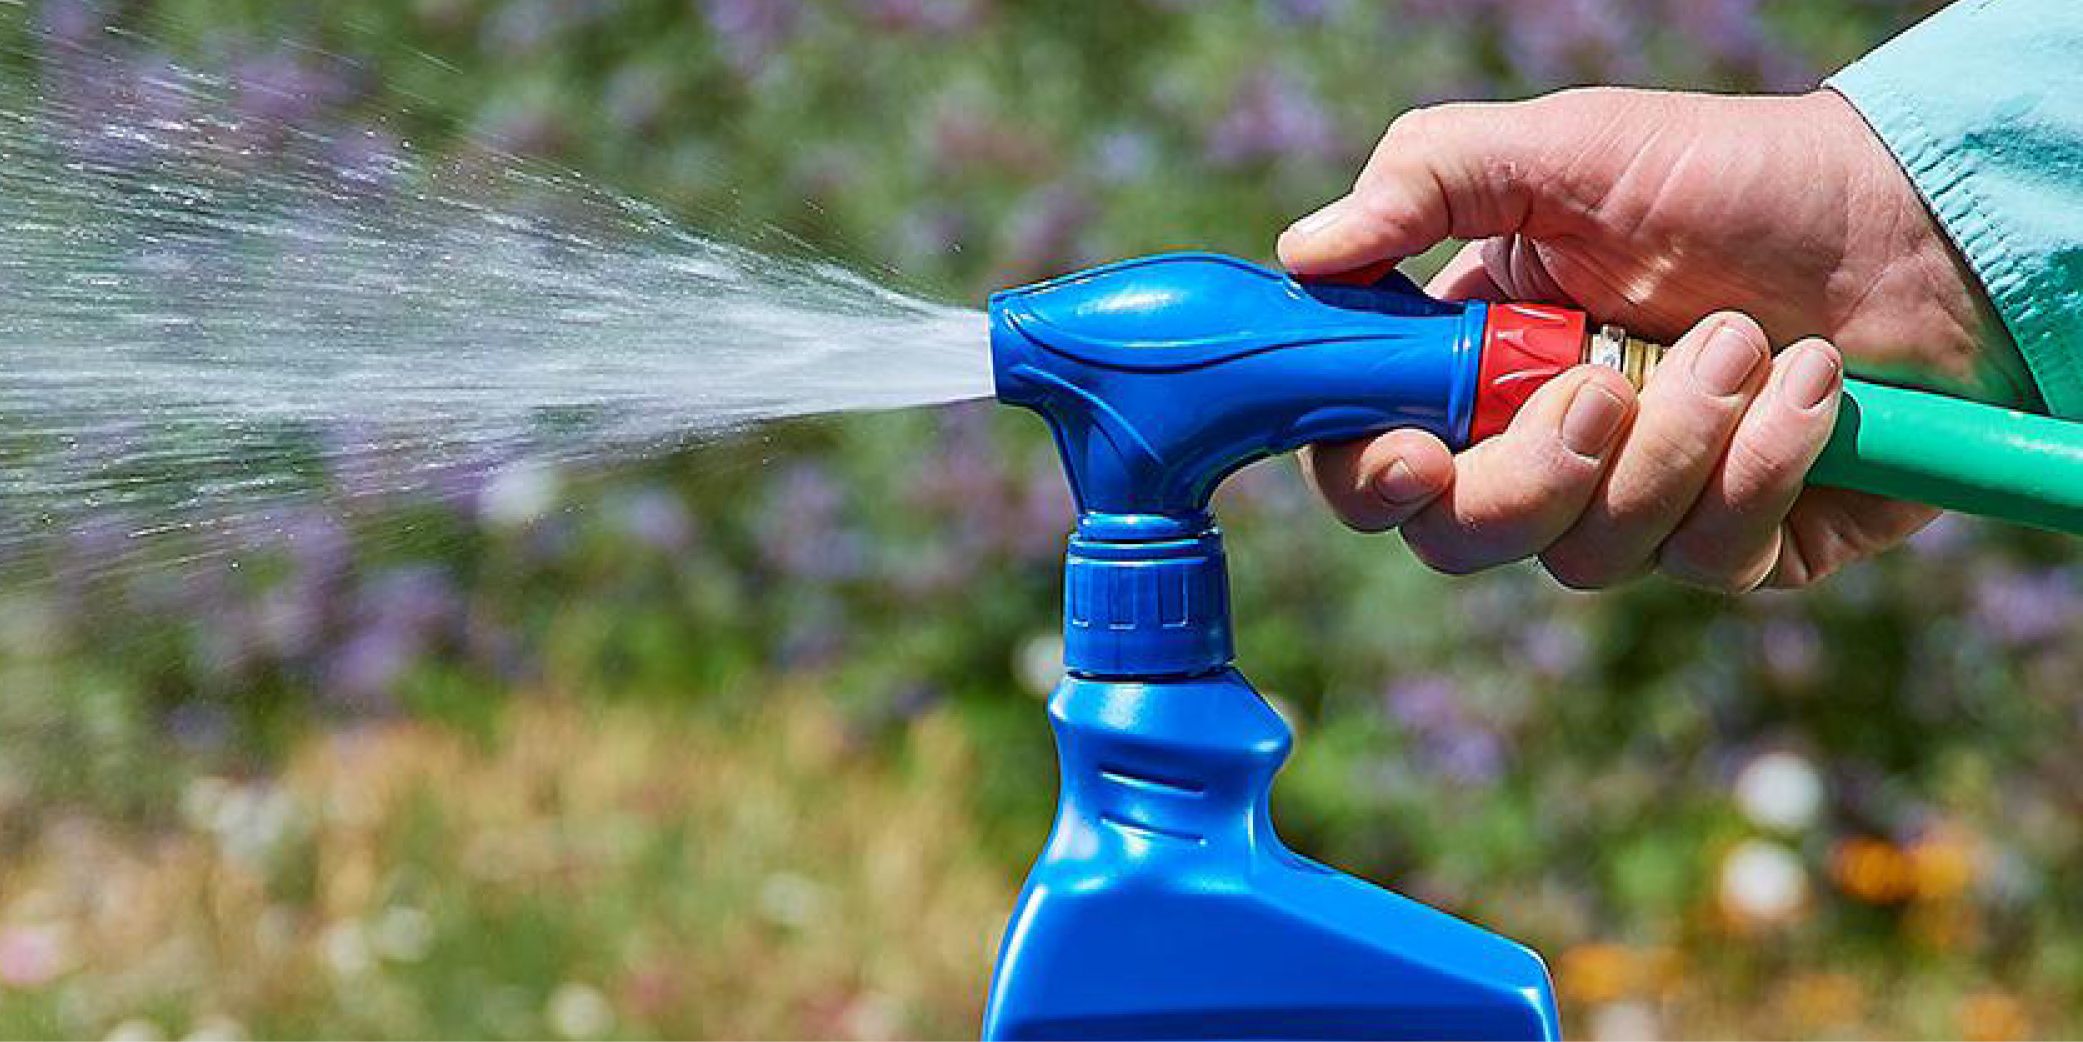 The 7 Best Weed Killers To Make Your Garden Clear And Beautiful,Hot Tottie For Cough